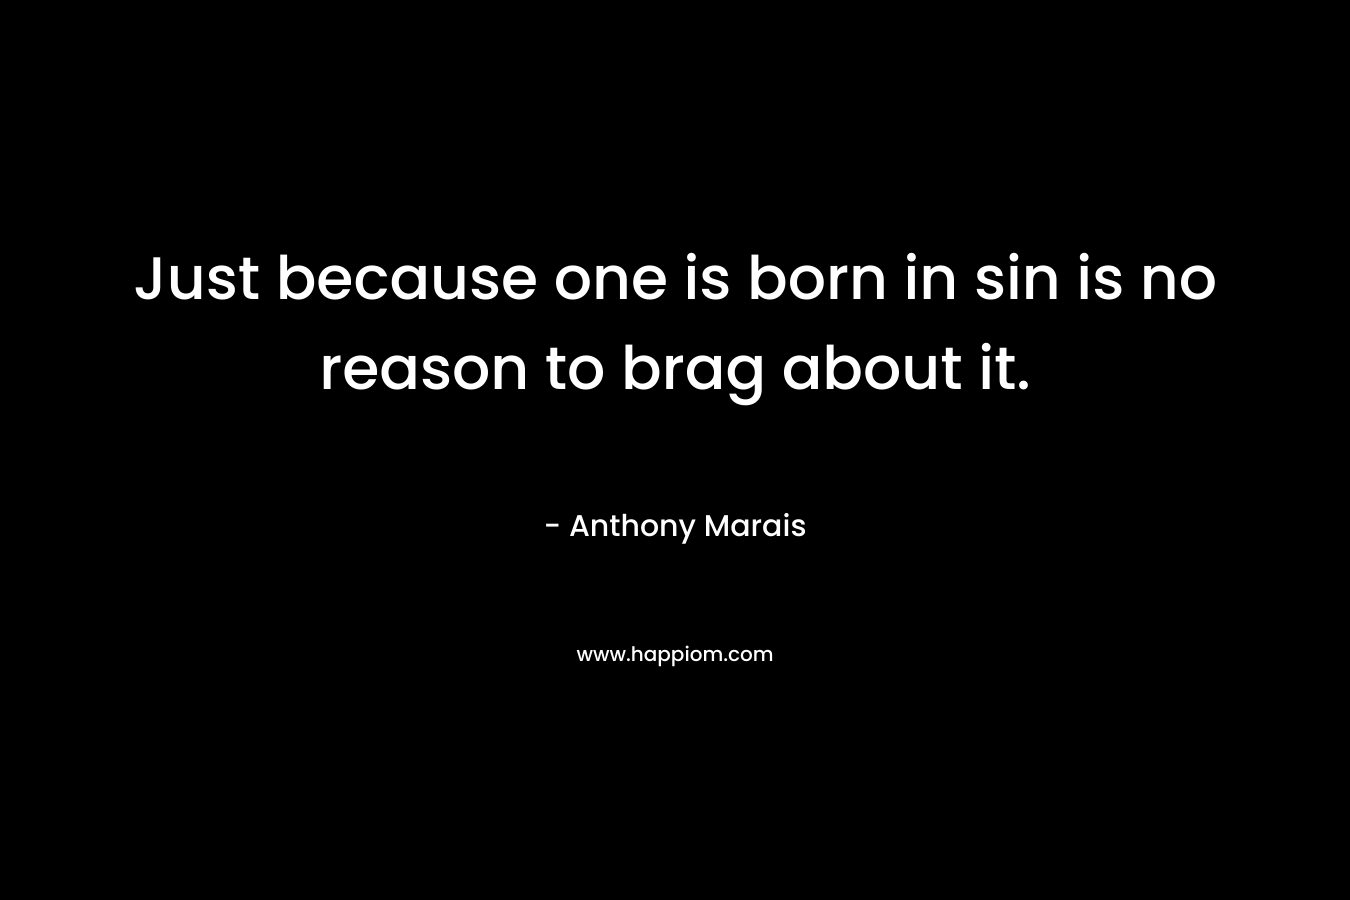 Just because one is born in sin is no reason to brag about it.